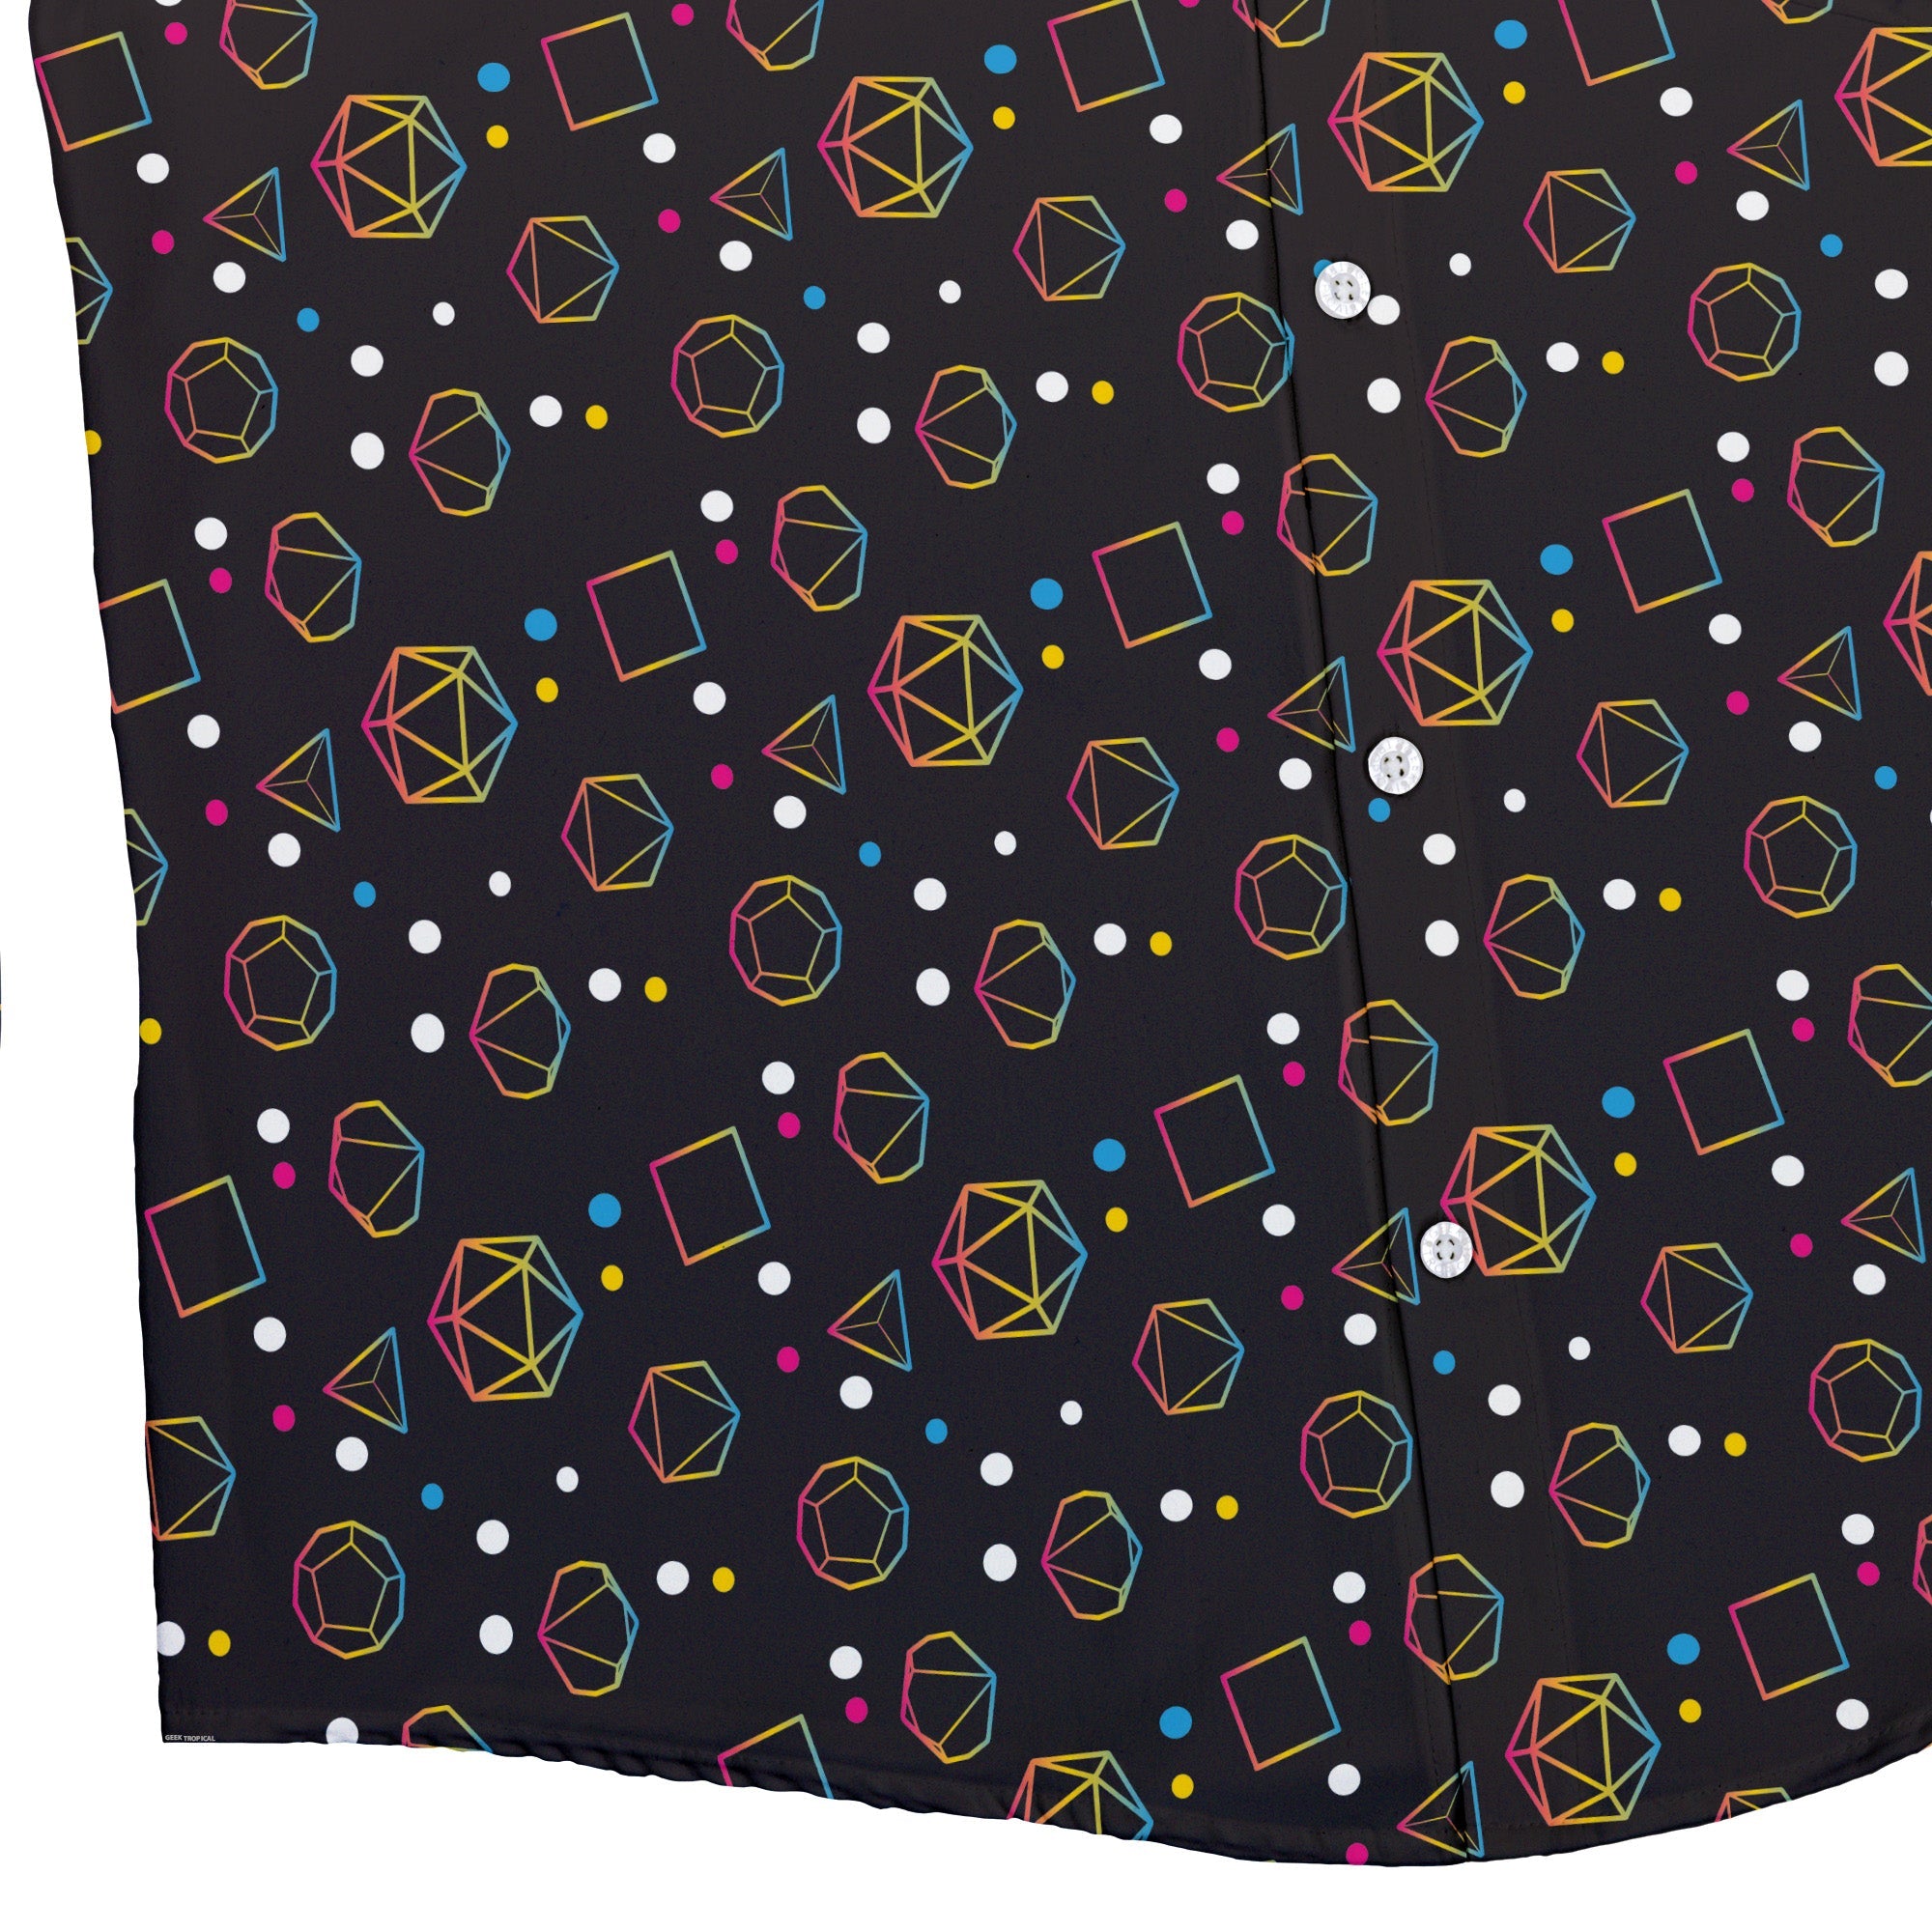 Pansexual Pride Flag DND Dice Button Up Shirt - adult sizing - Design by Heather Davenport - dnd & rpg print